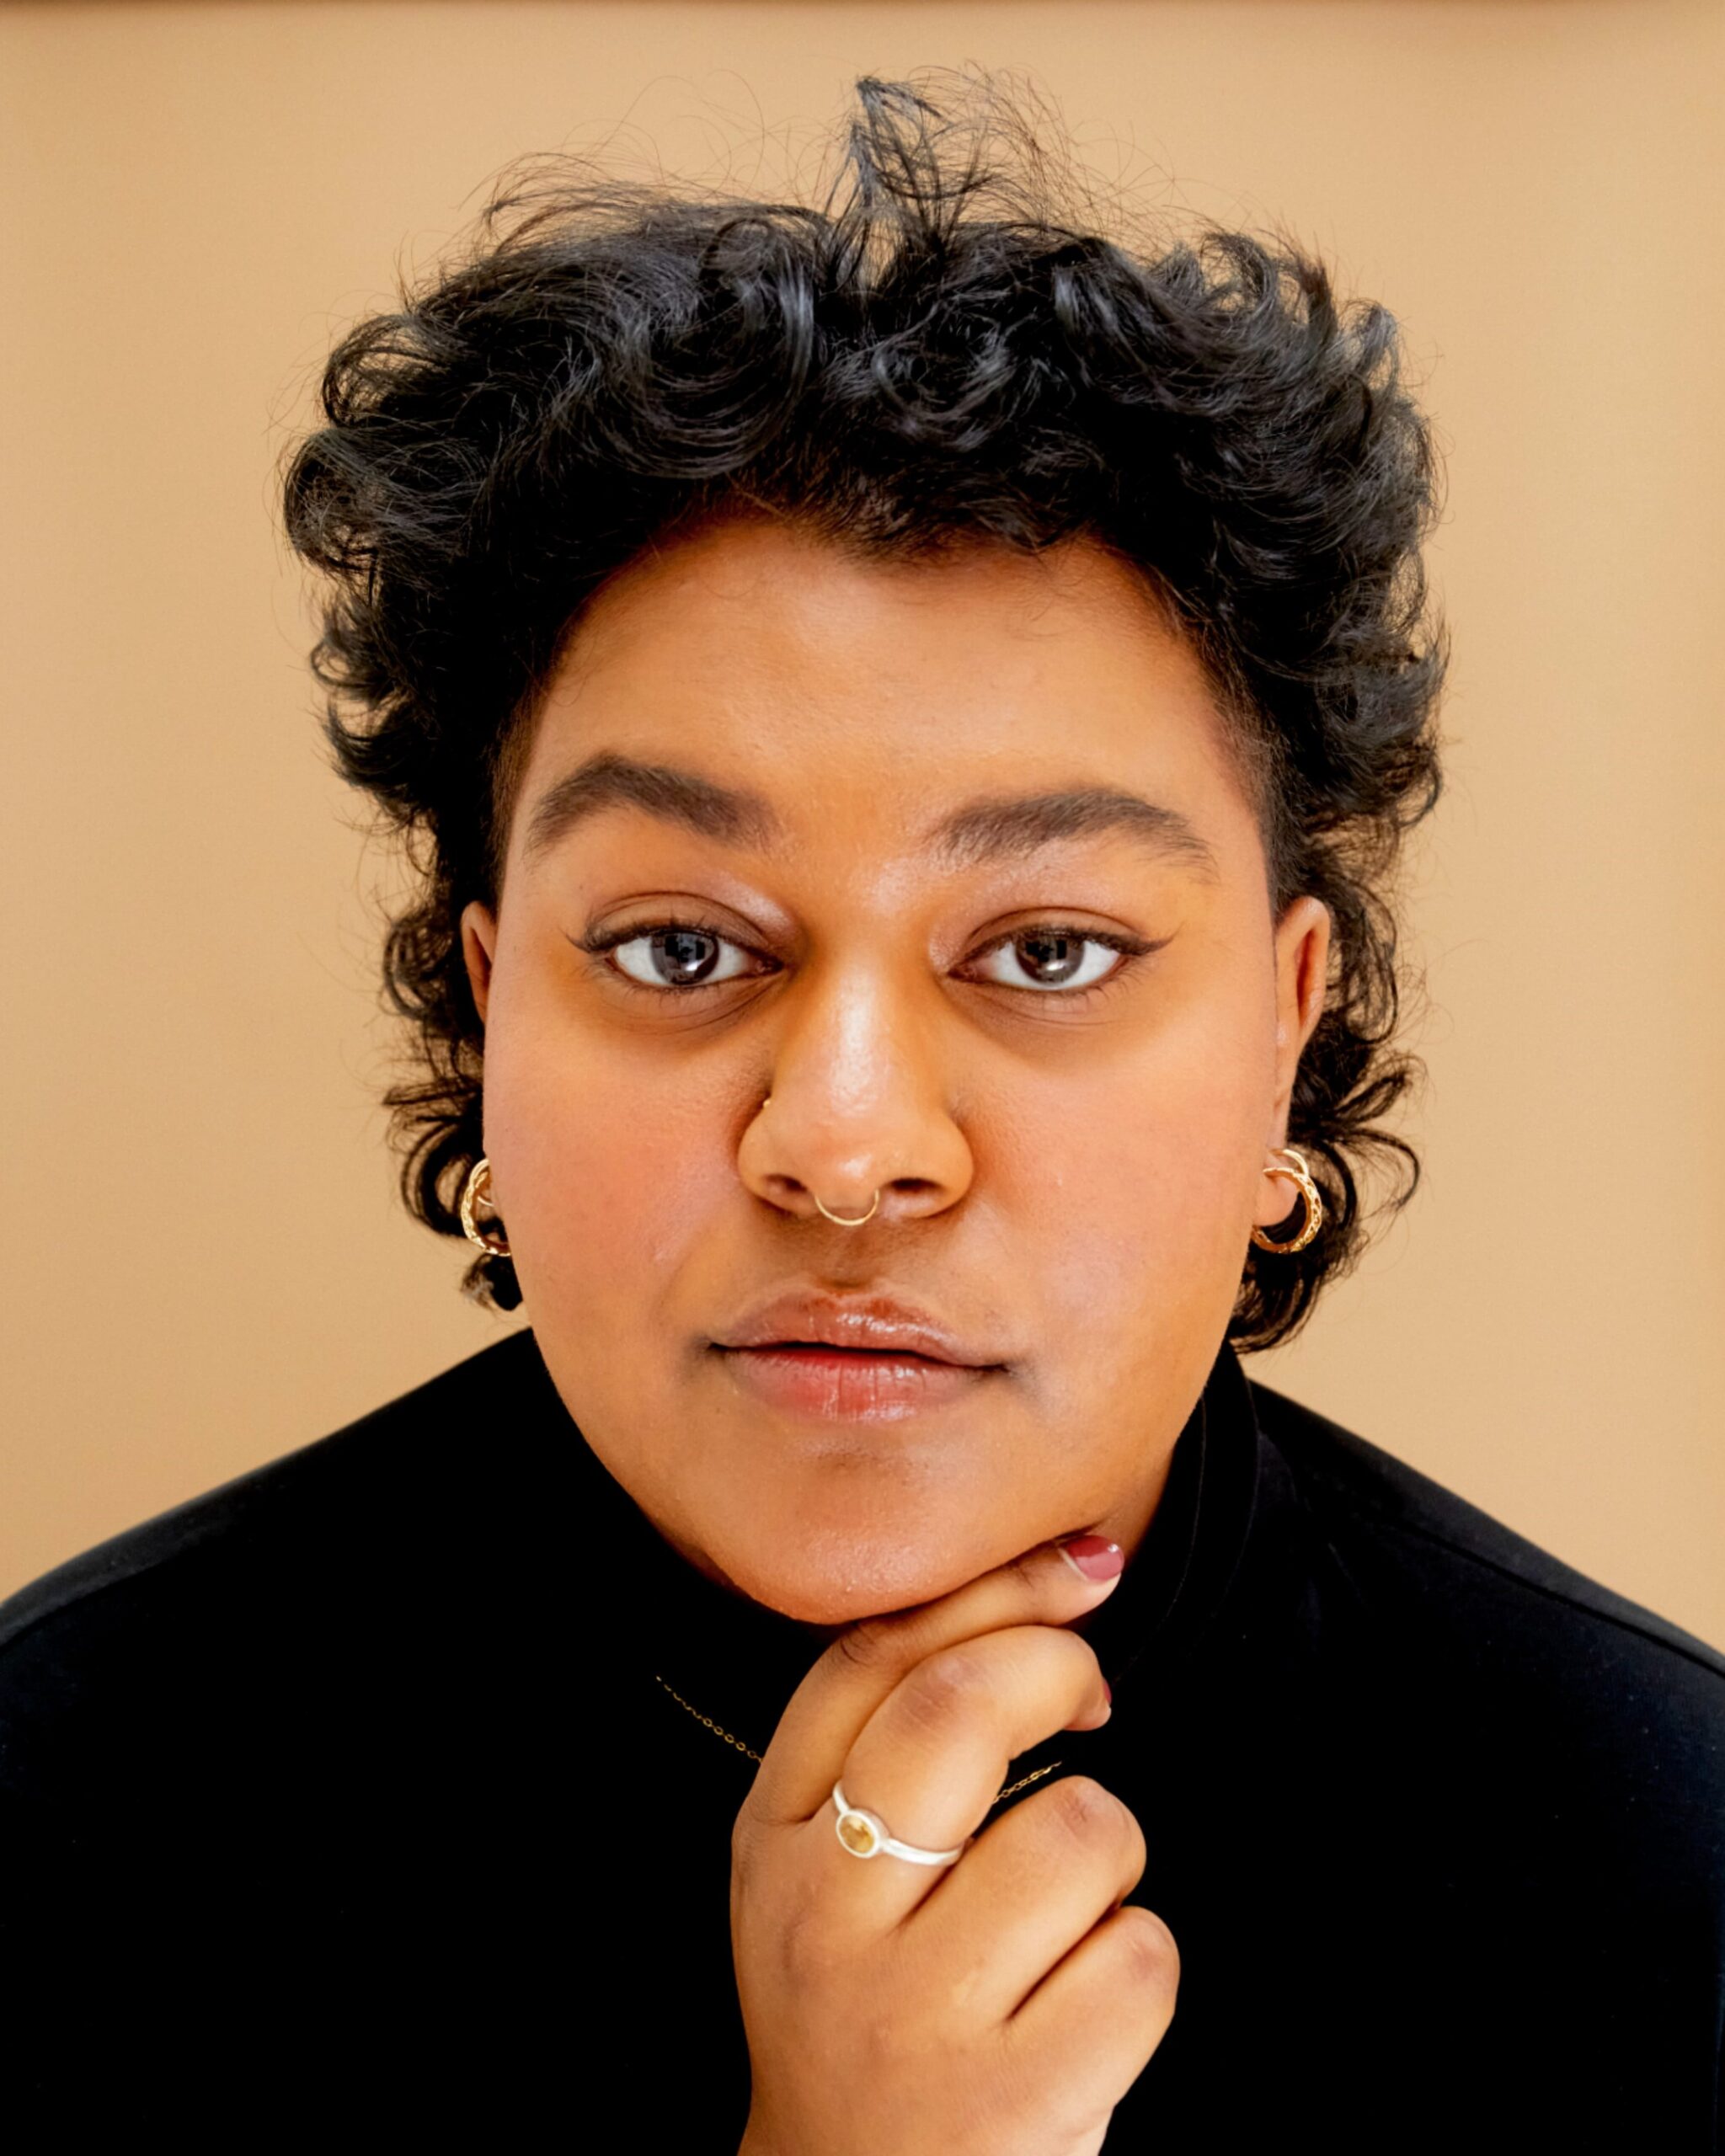 Anika is sitting close to the camera against a light brown background, facing forward with a slight smirk and their right hand on their chin. They have short, black, curly hair and are wearing a black turtle neck. They have one eyebrow slightly raised and are wearing various pieces of gold jewelry.